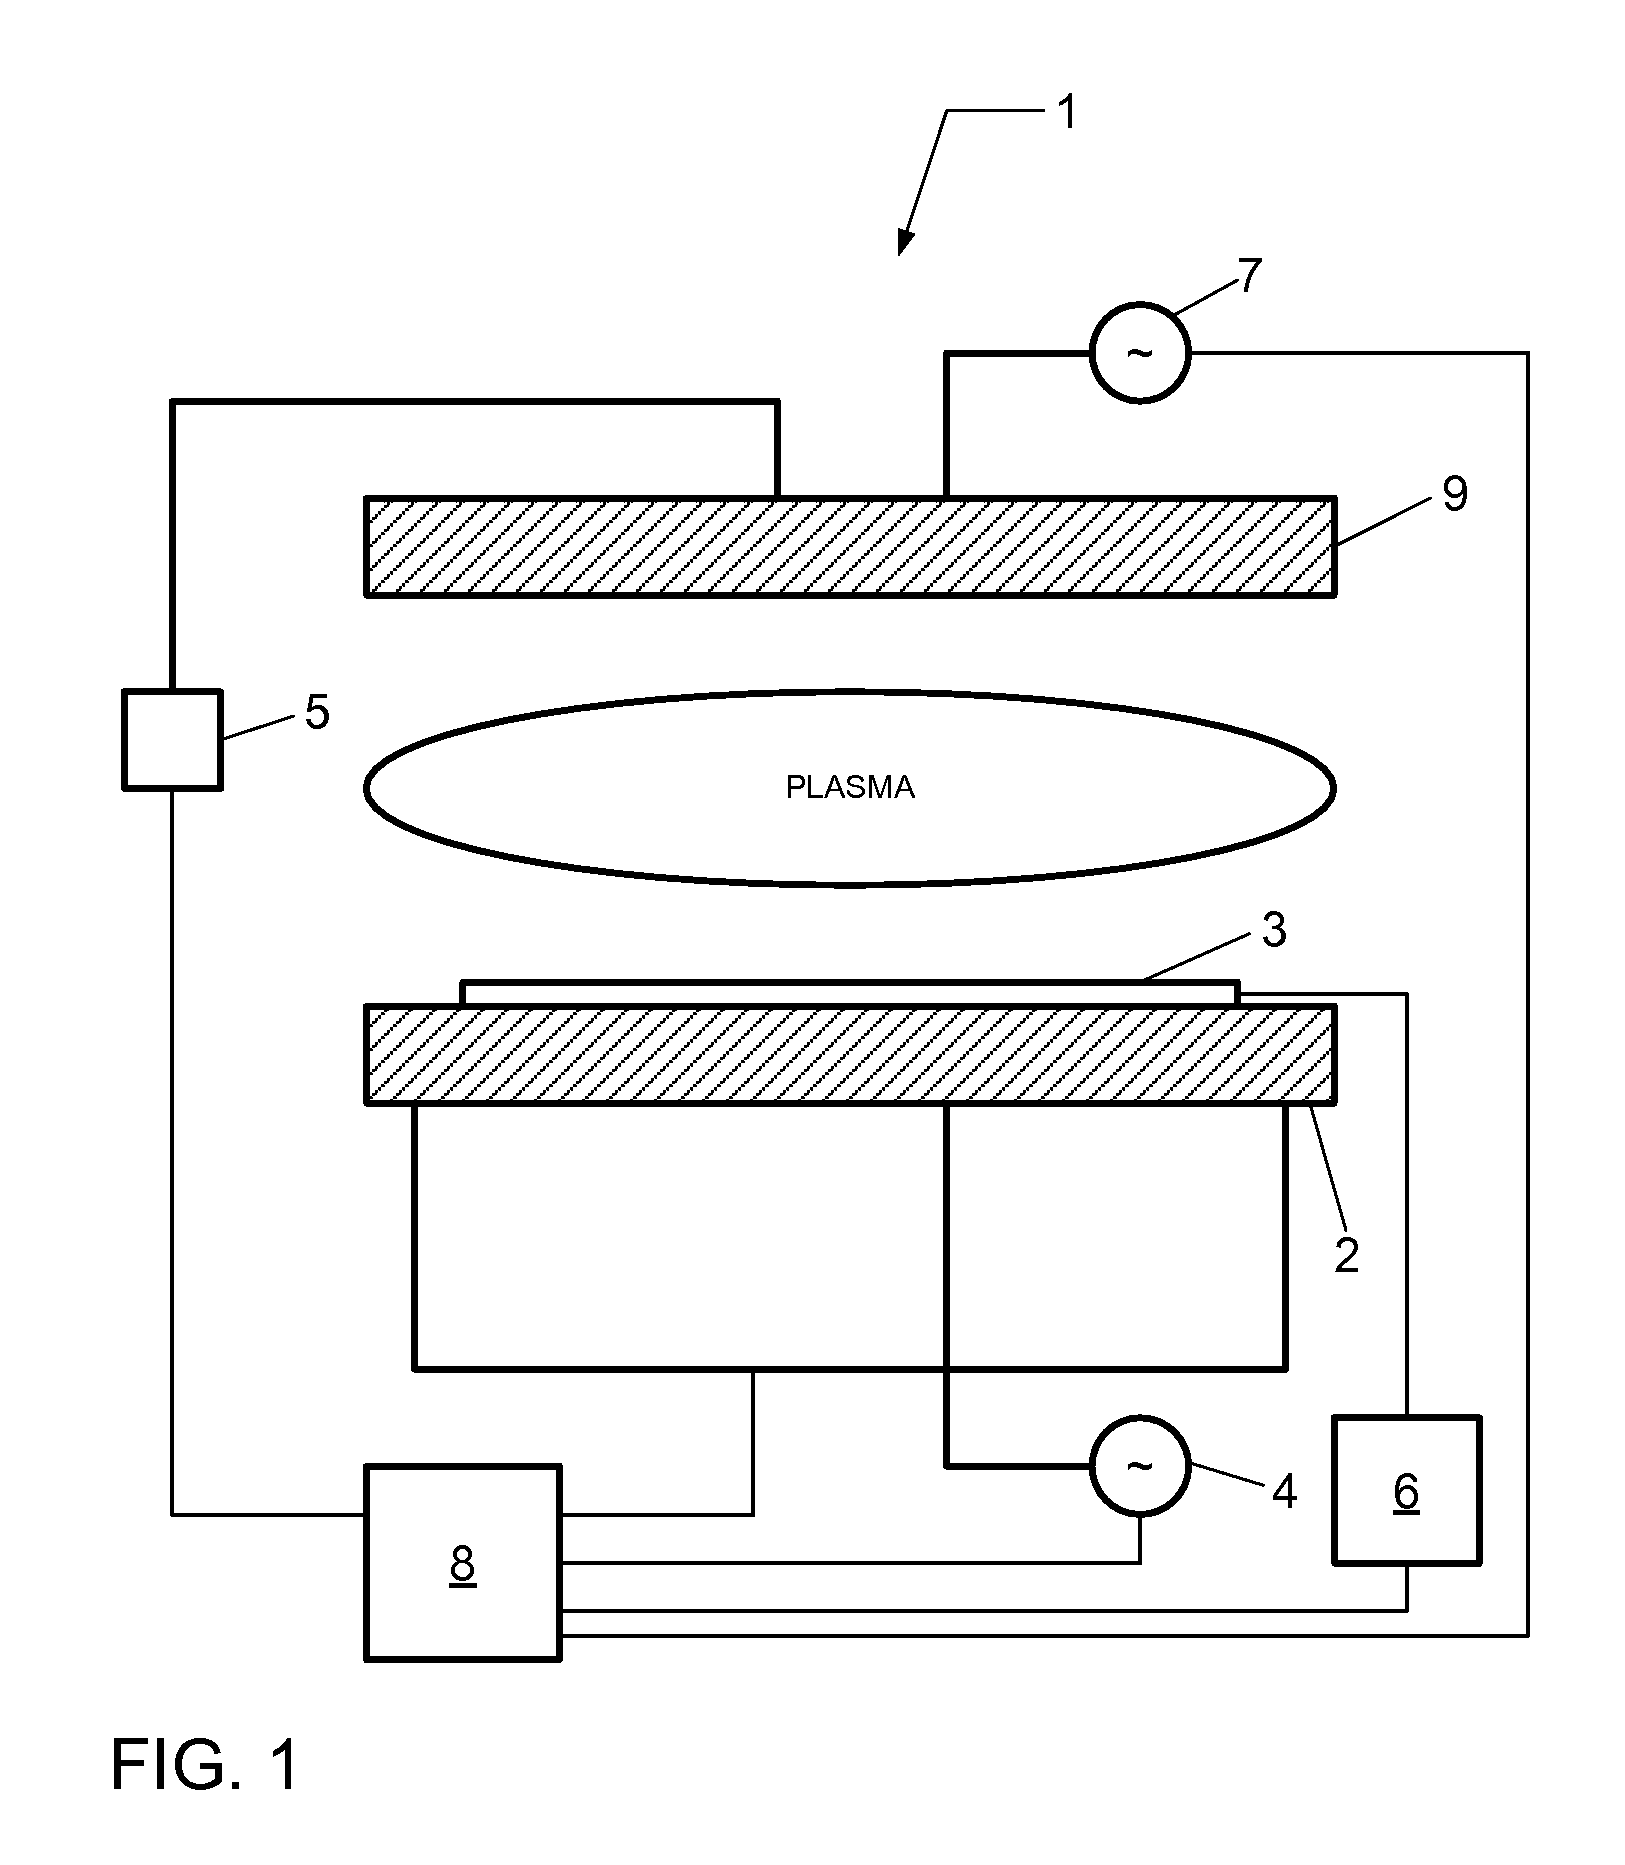 Ion energy analyzer and methods of manufacturing and operating